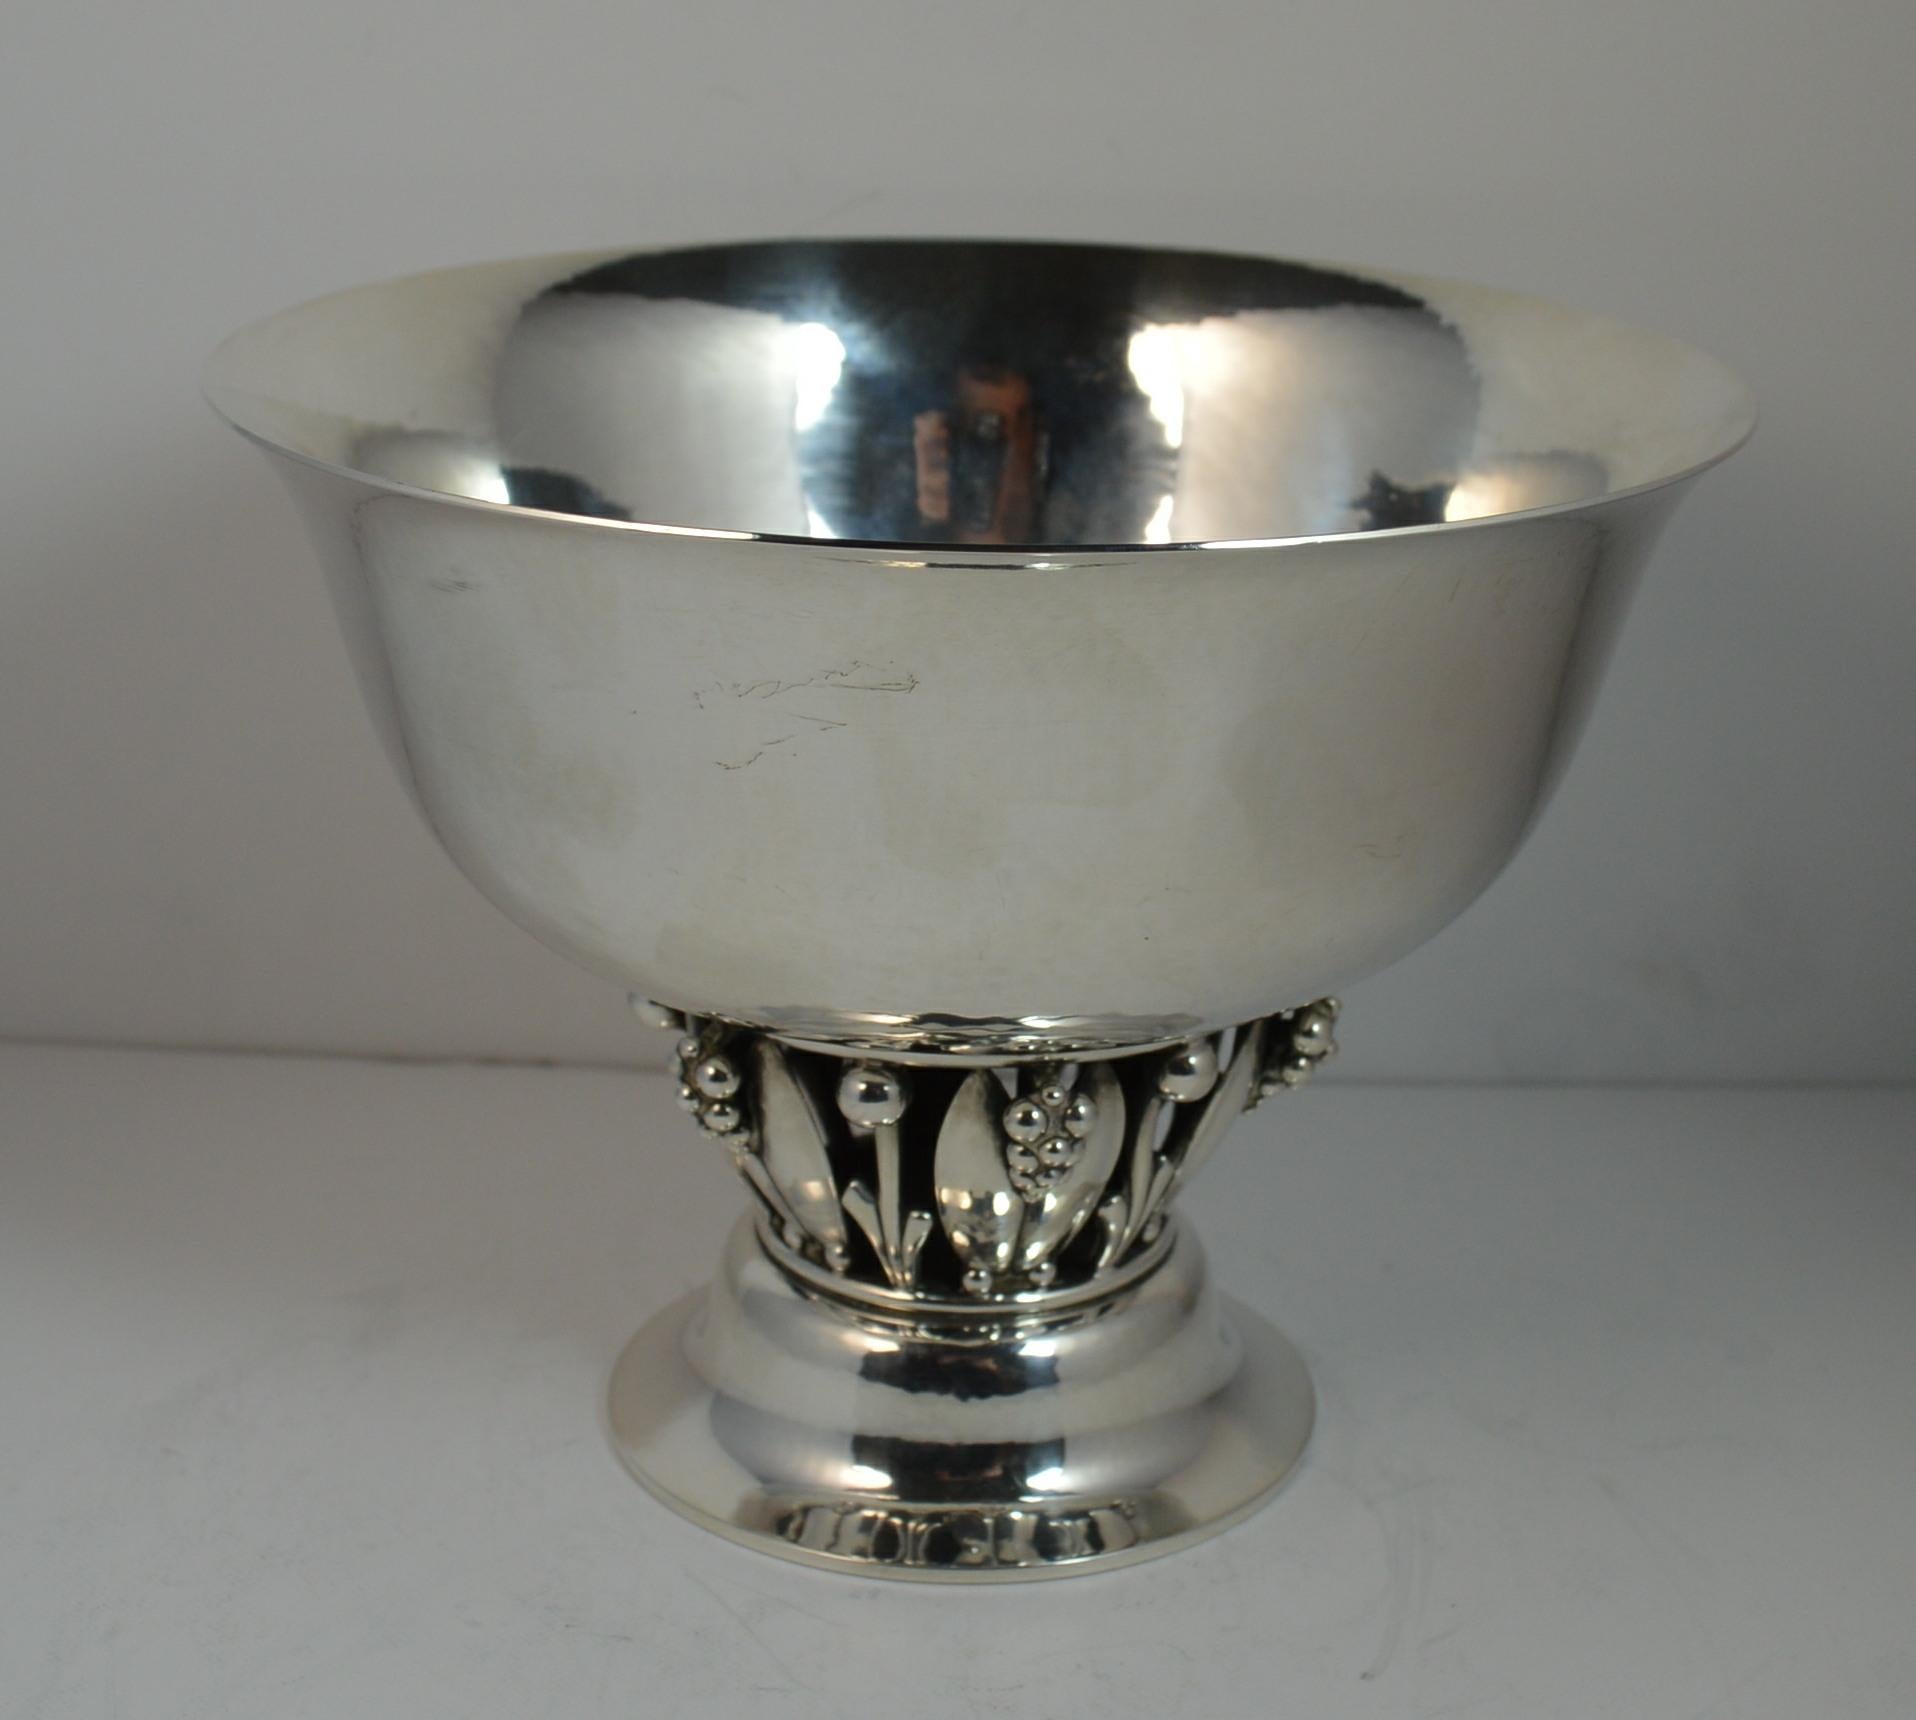 A stunning Georg Jensen designer sterling silver bowl.
Model number 197 B, a rare example.
Designed with a very fine hammered pattern to the top section, the lower part with pierced leaf / grape / berry pattern and standing on a light hammered